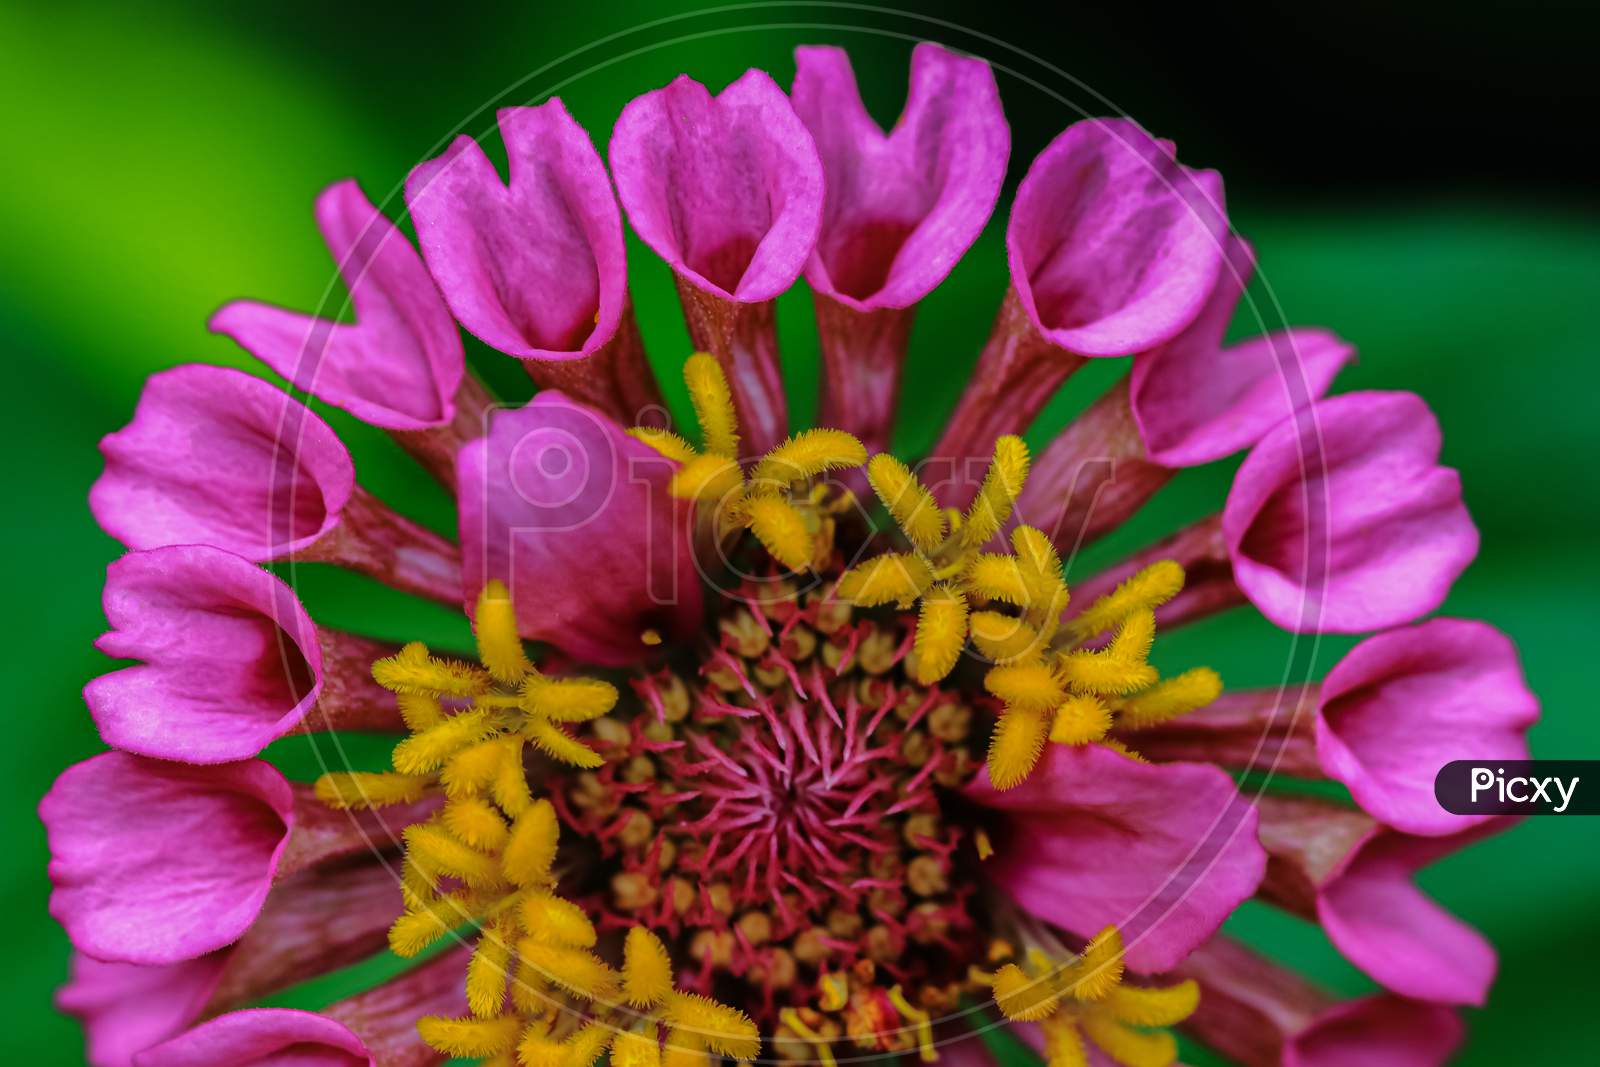 Macro image of a zinnia flower bud with vibrant colors